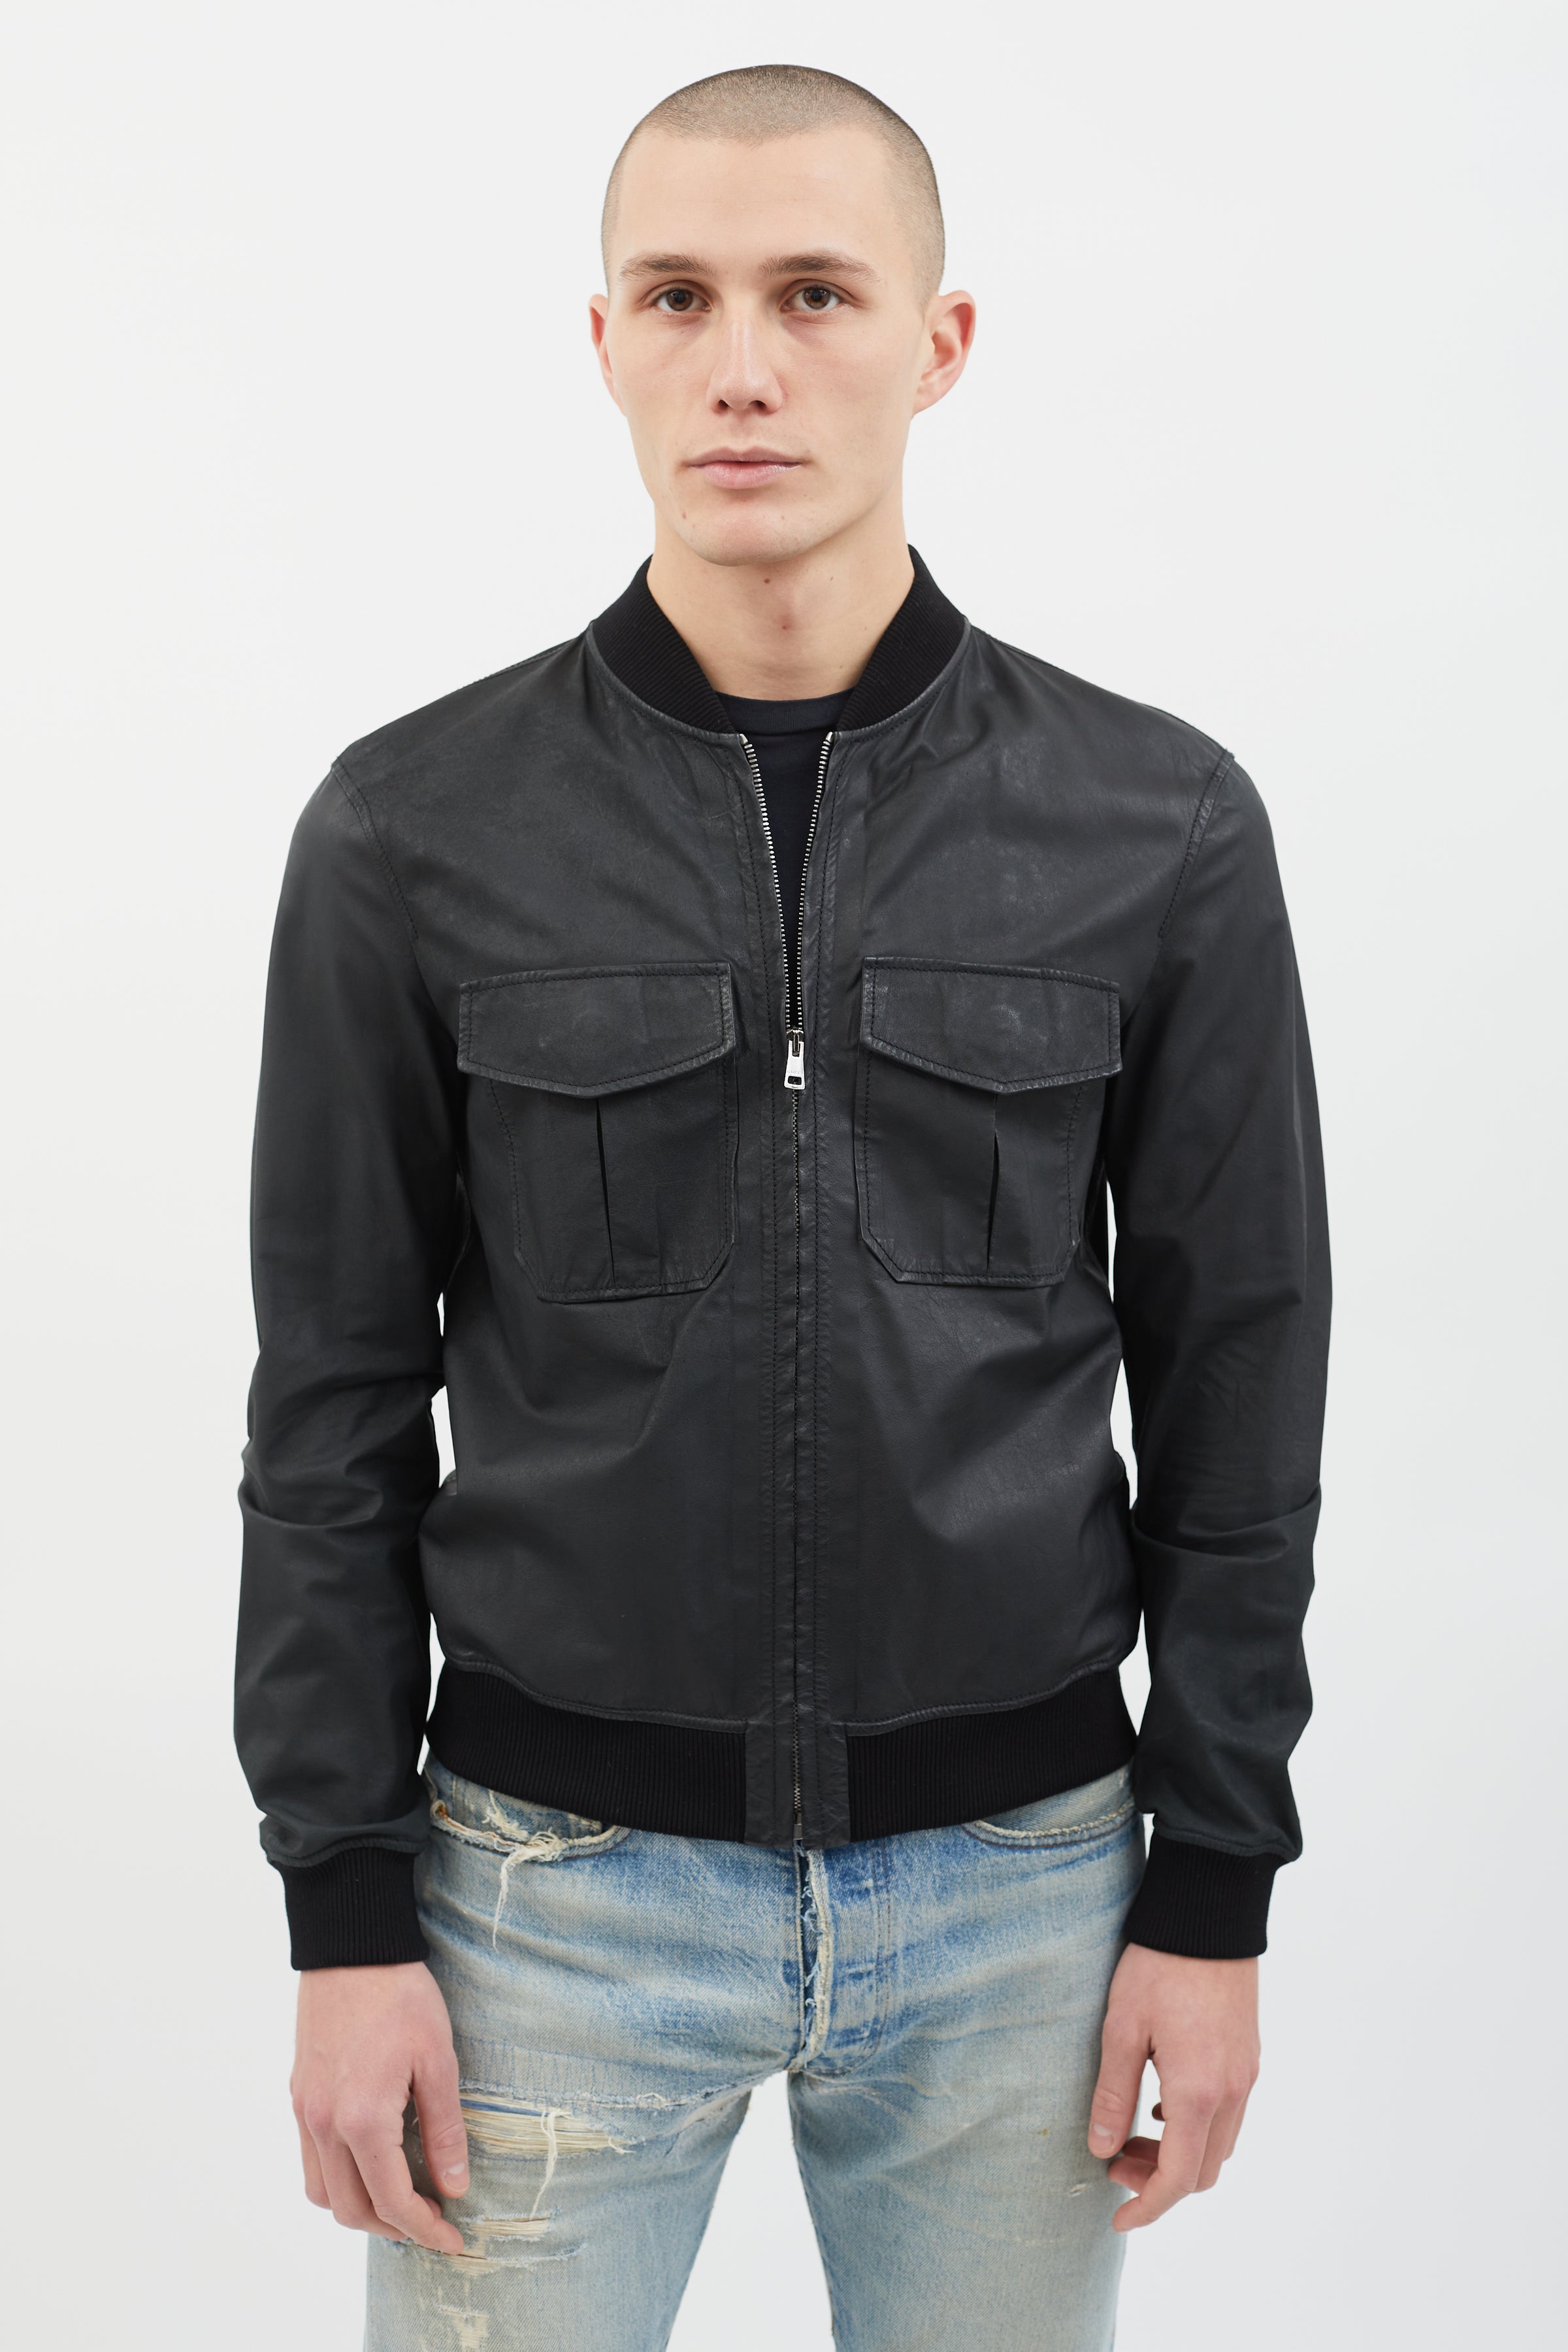 Gucci Men's GG Embossed Leather Jacket in Black Gucci